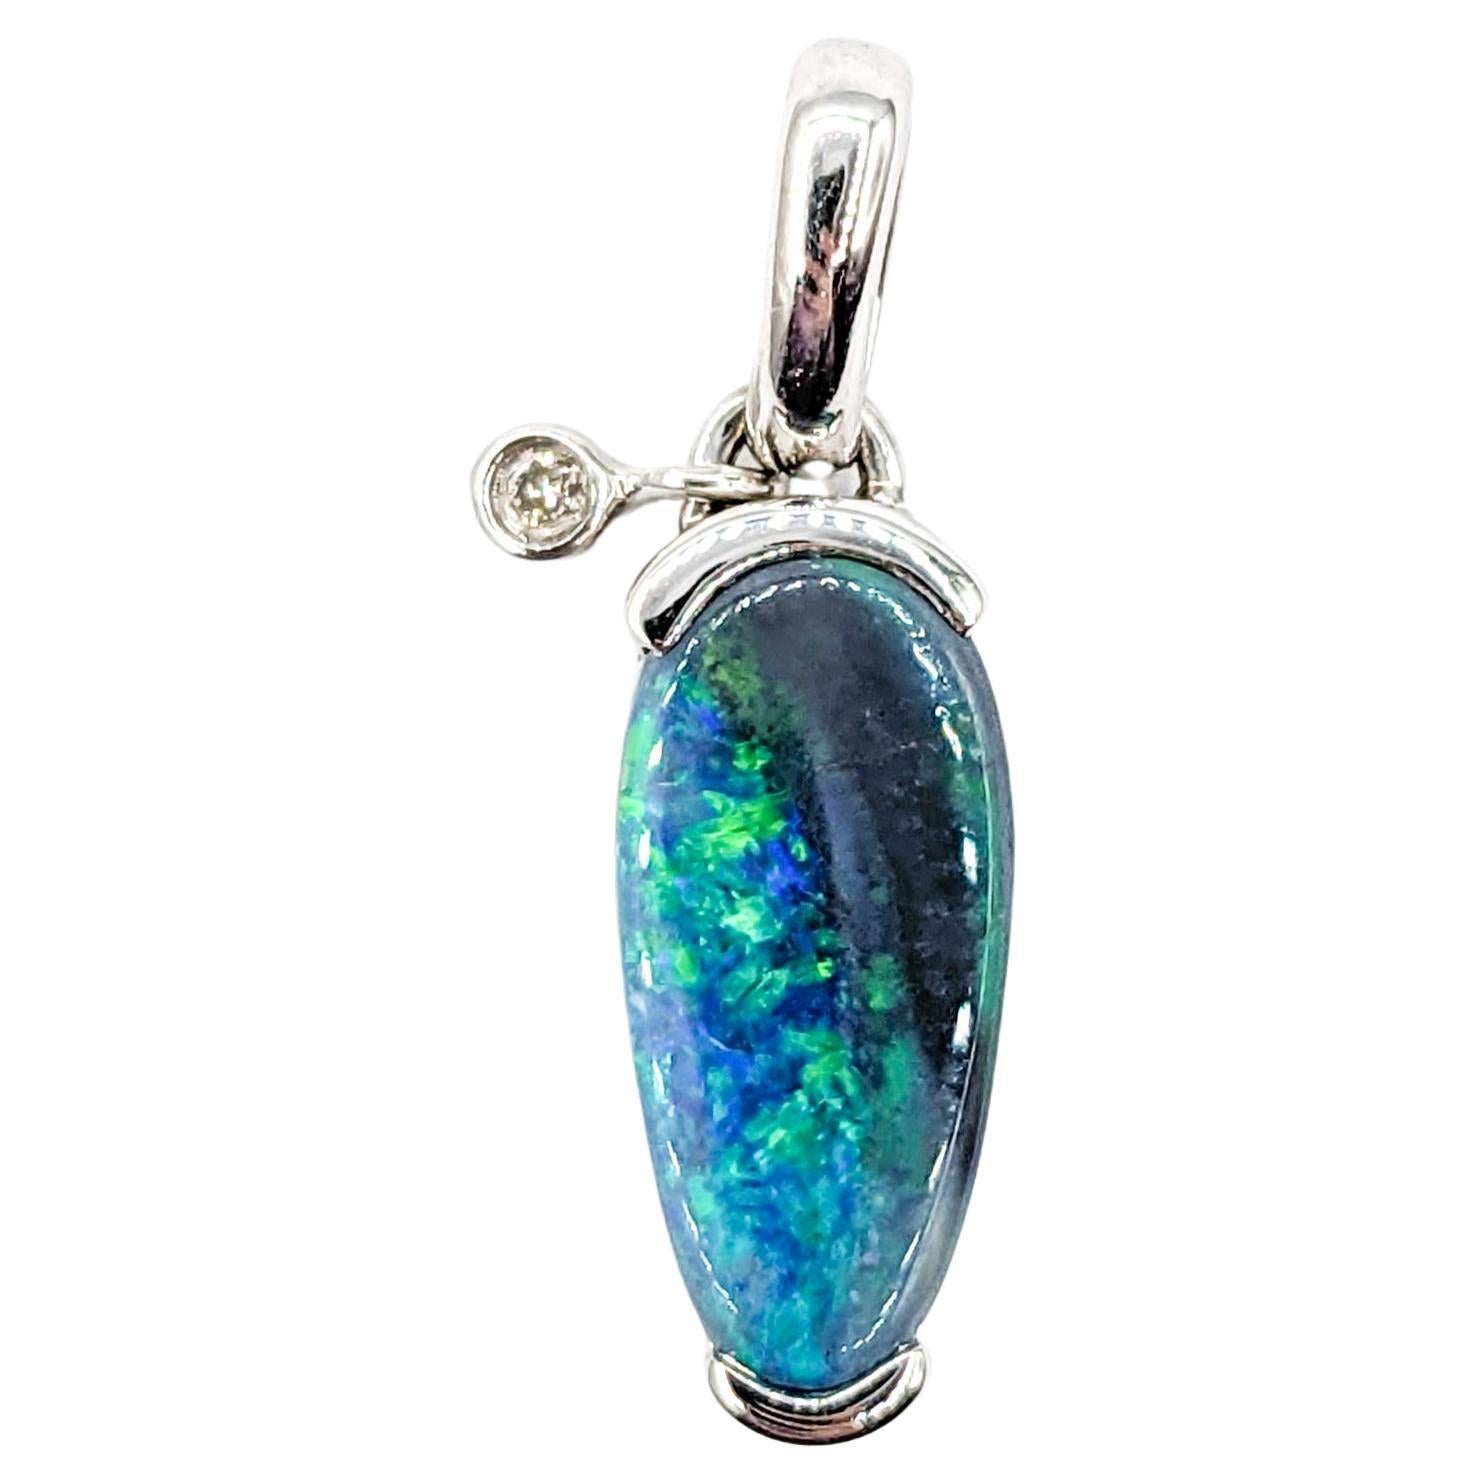 1.50ct Black Opal Pendant in White Gold